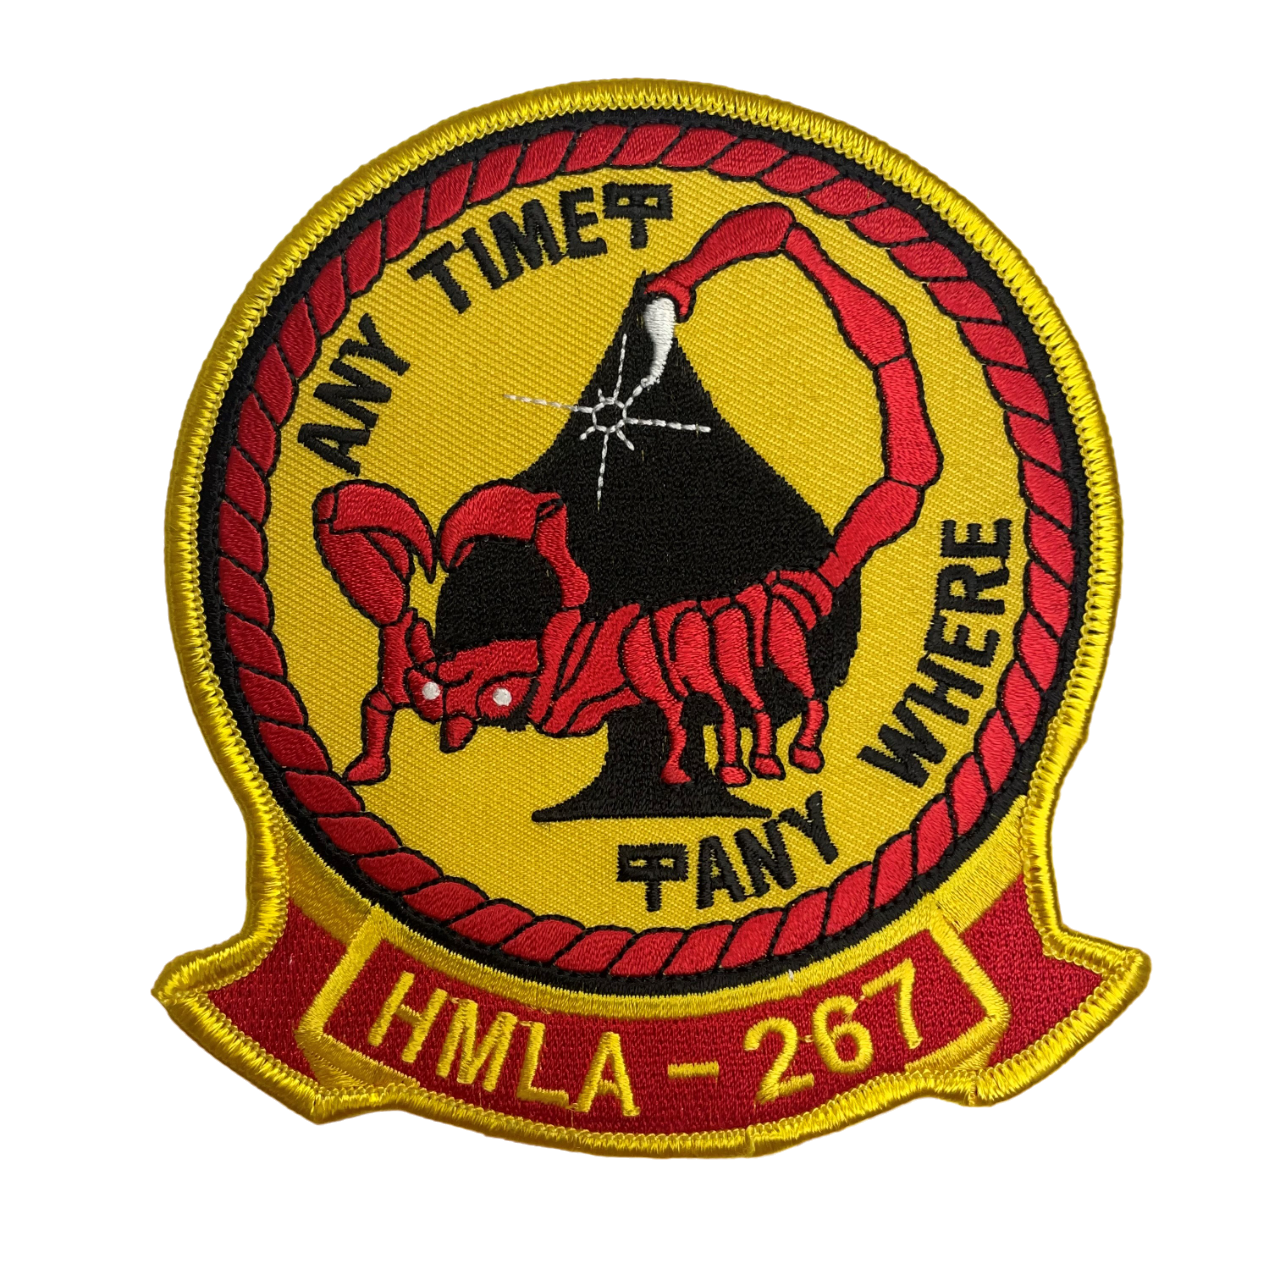 HMLA-267 Stingers "Any Time, Anywhere" - Officially Licensed USMC Patch